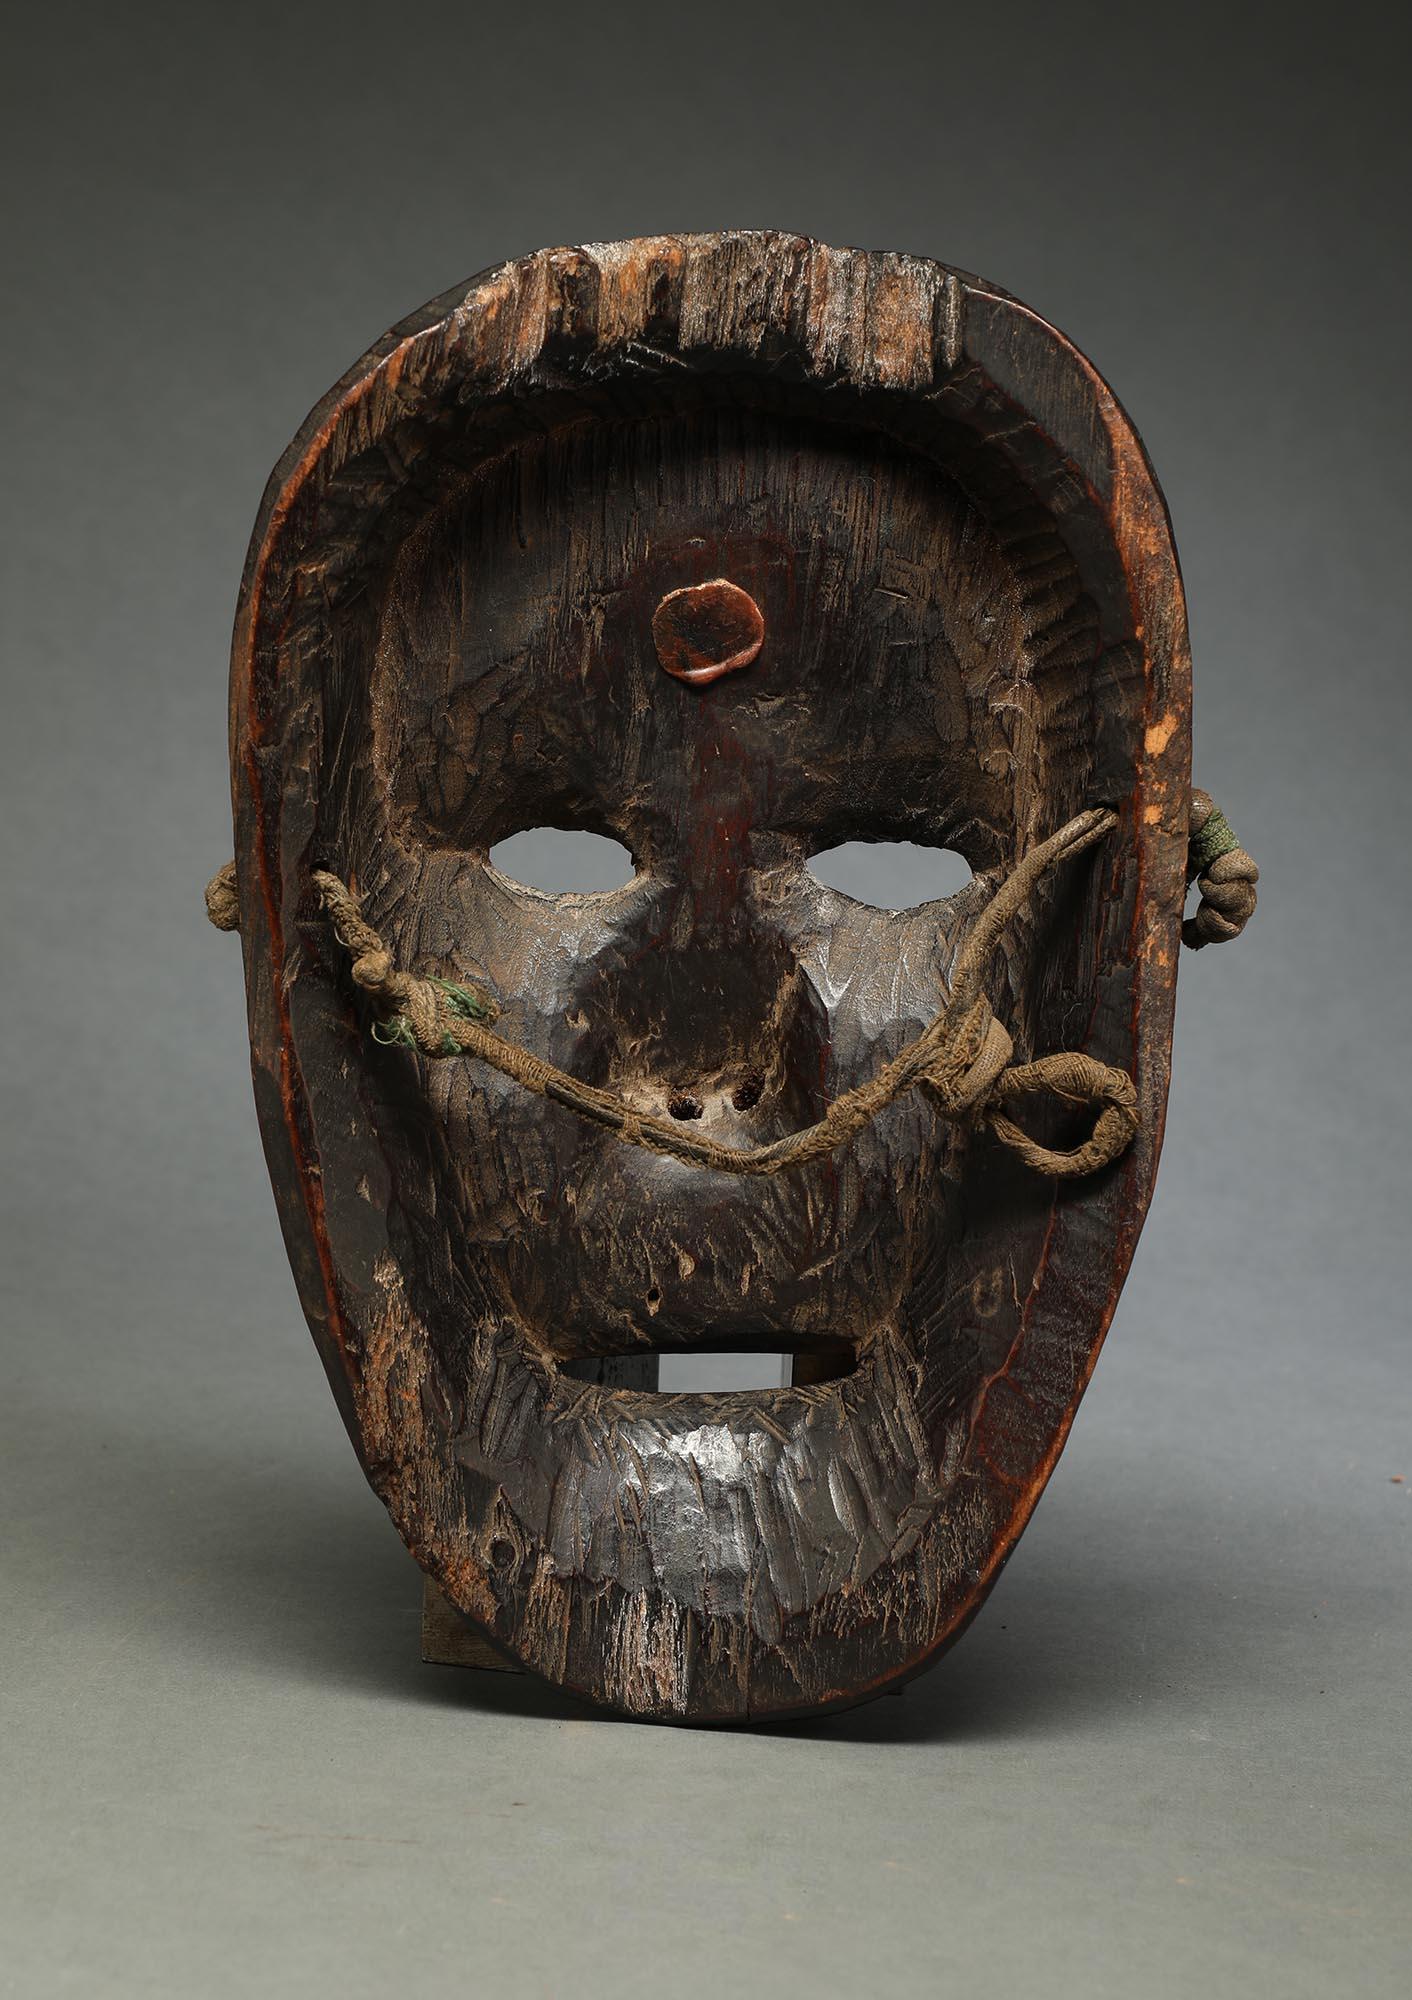 Tribal Nepal Dance Mask Oval Face with Open Mouth Teeth, Late 19th-Early 20th Century